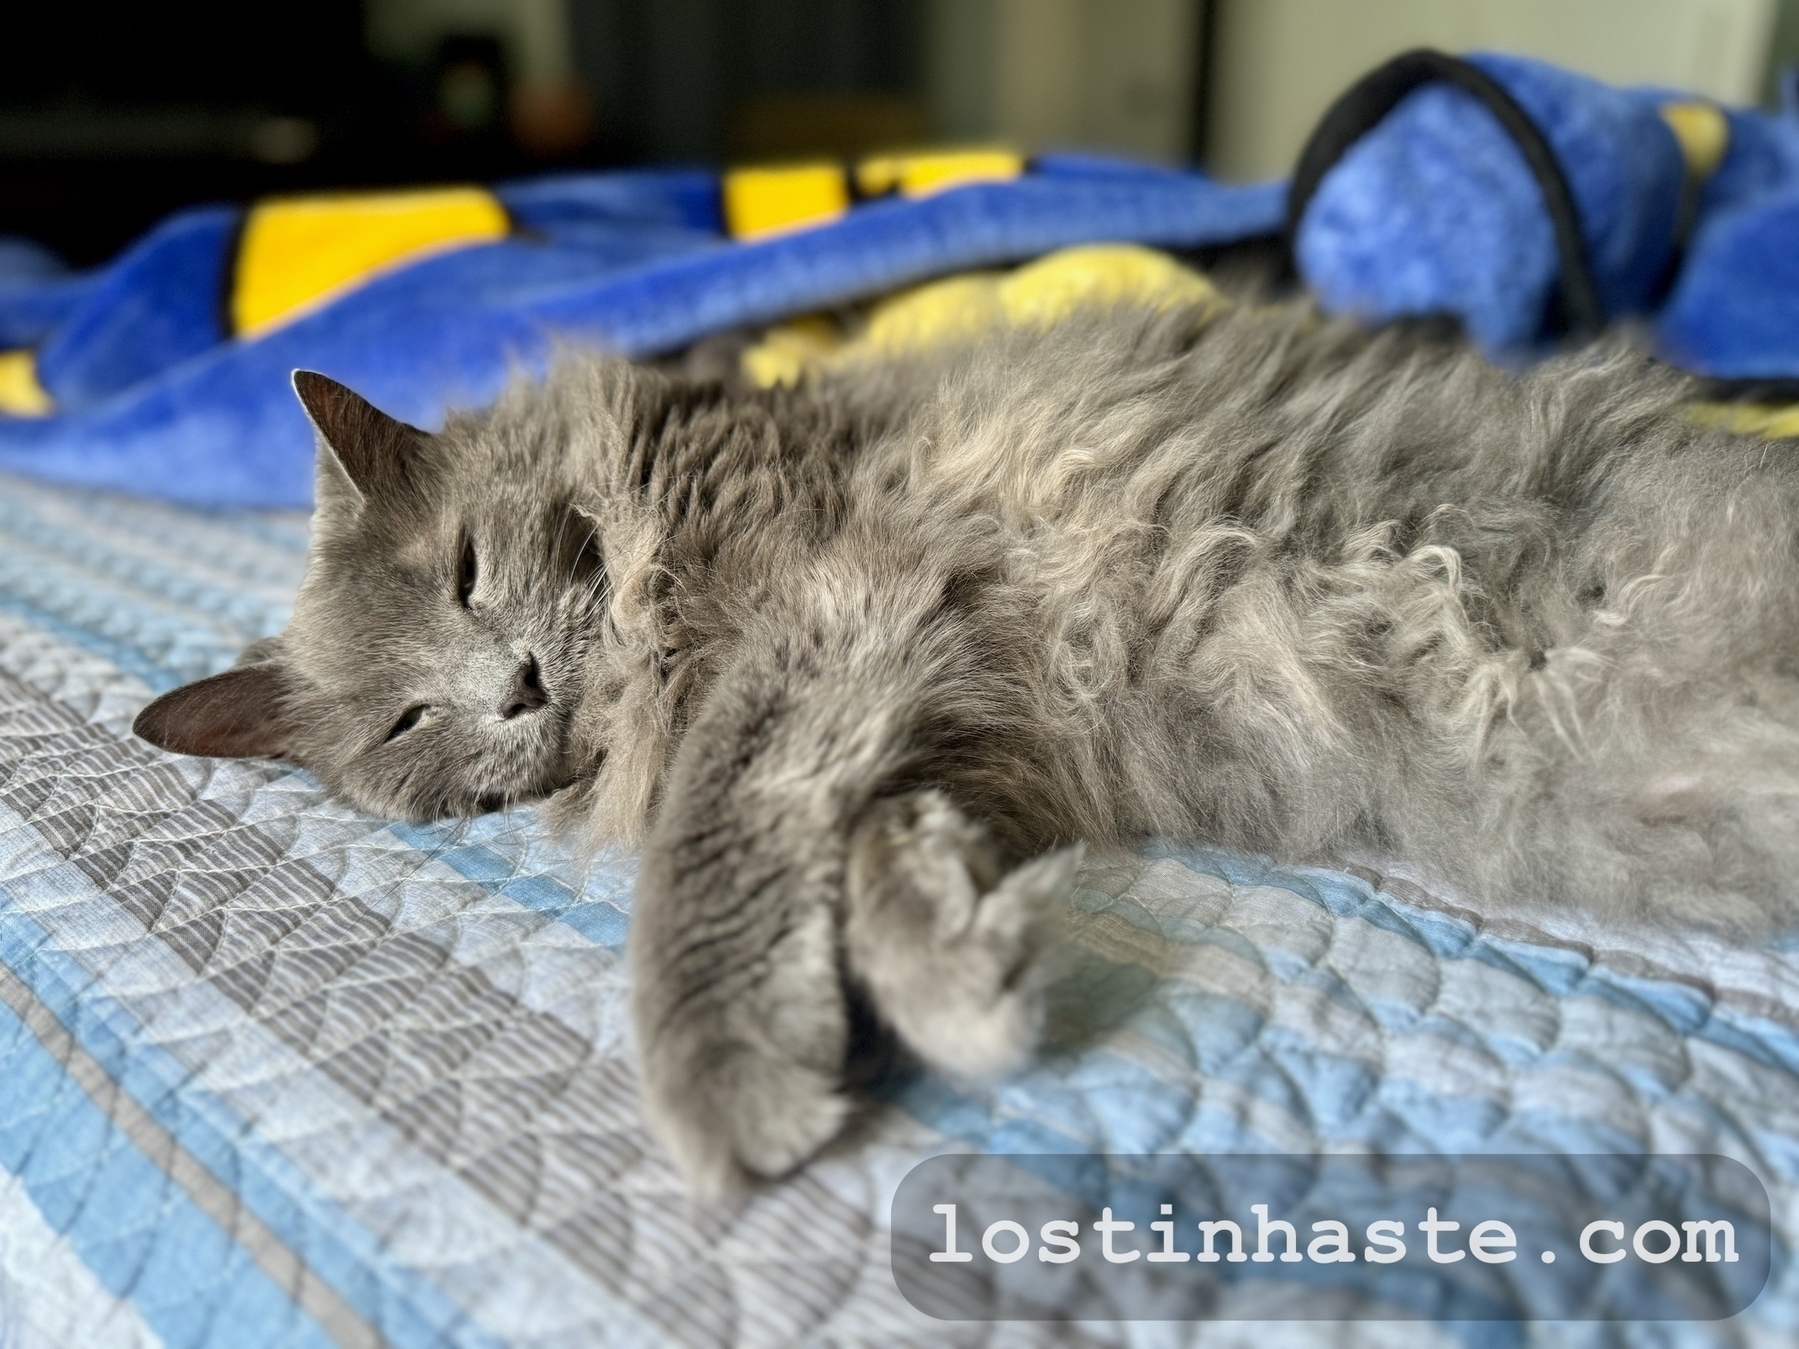 A grey, fluffy cat lounges on a checkered blue and white quilt, with a text overlay saying 'lostinhaste.com.'